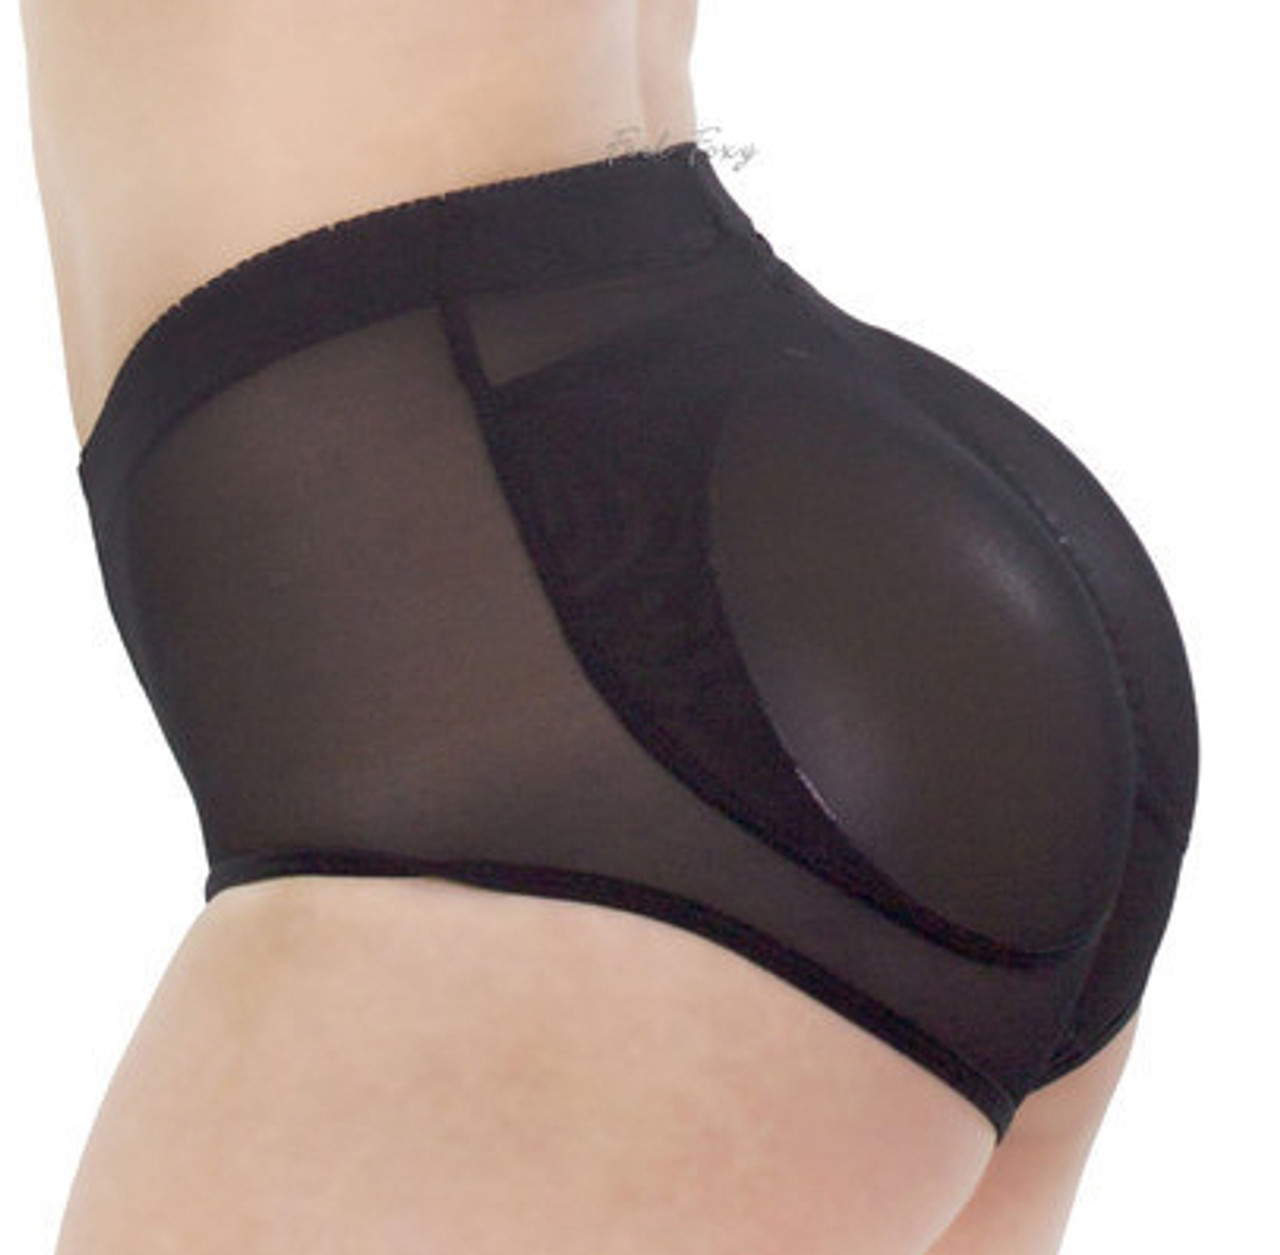 The Natural Women's Padded Panty Underwear, Black, S 